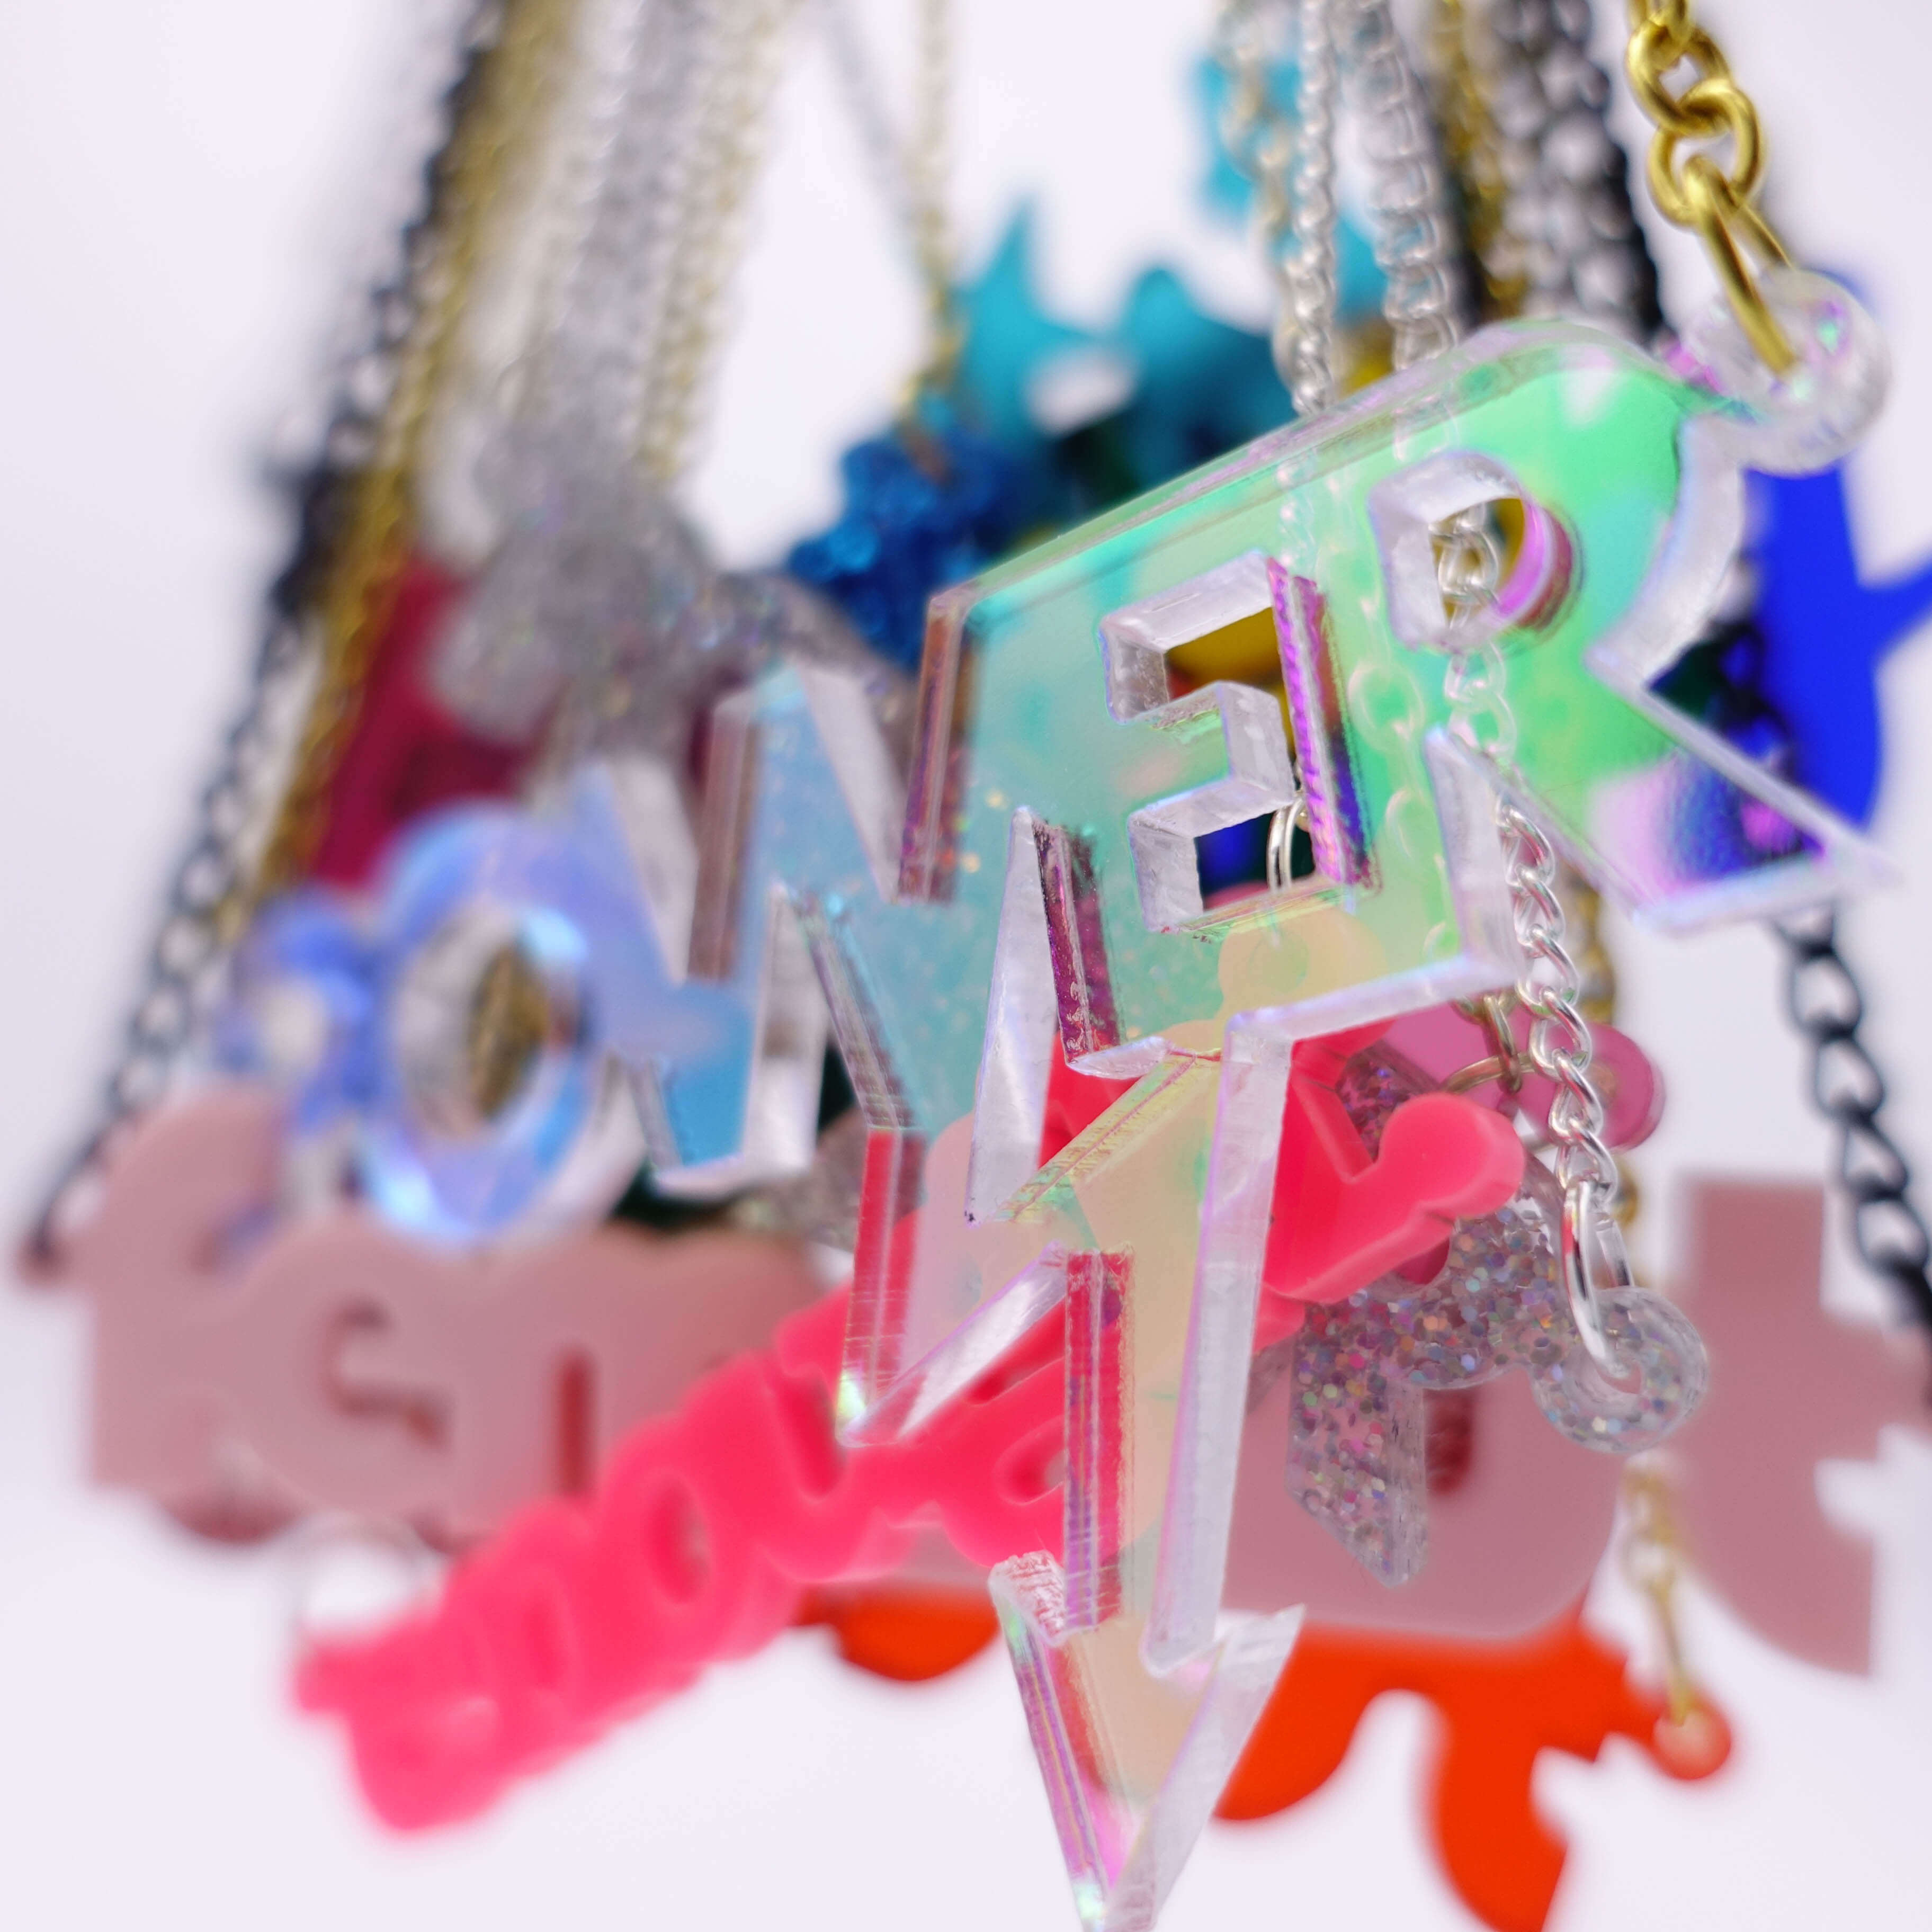 Power necklaces designed by Sarah Day at Wear and Resist in collaboration with Mary Beard. 